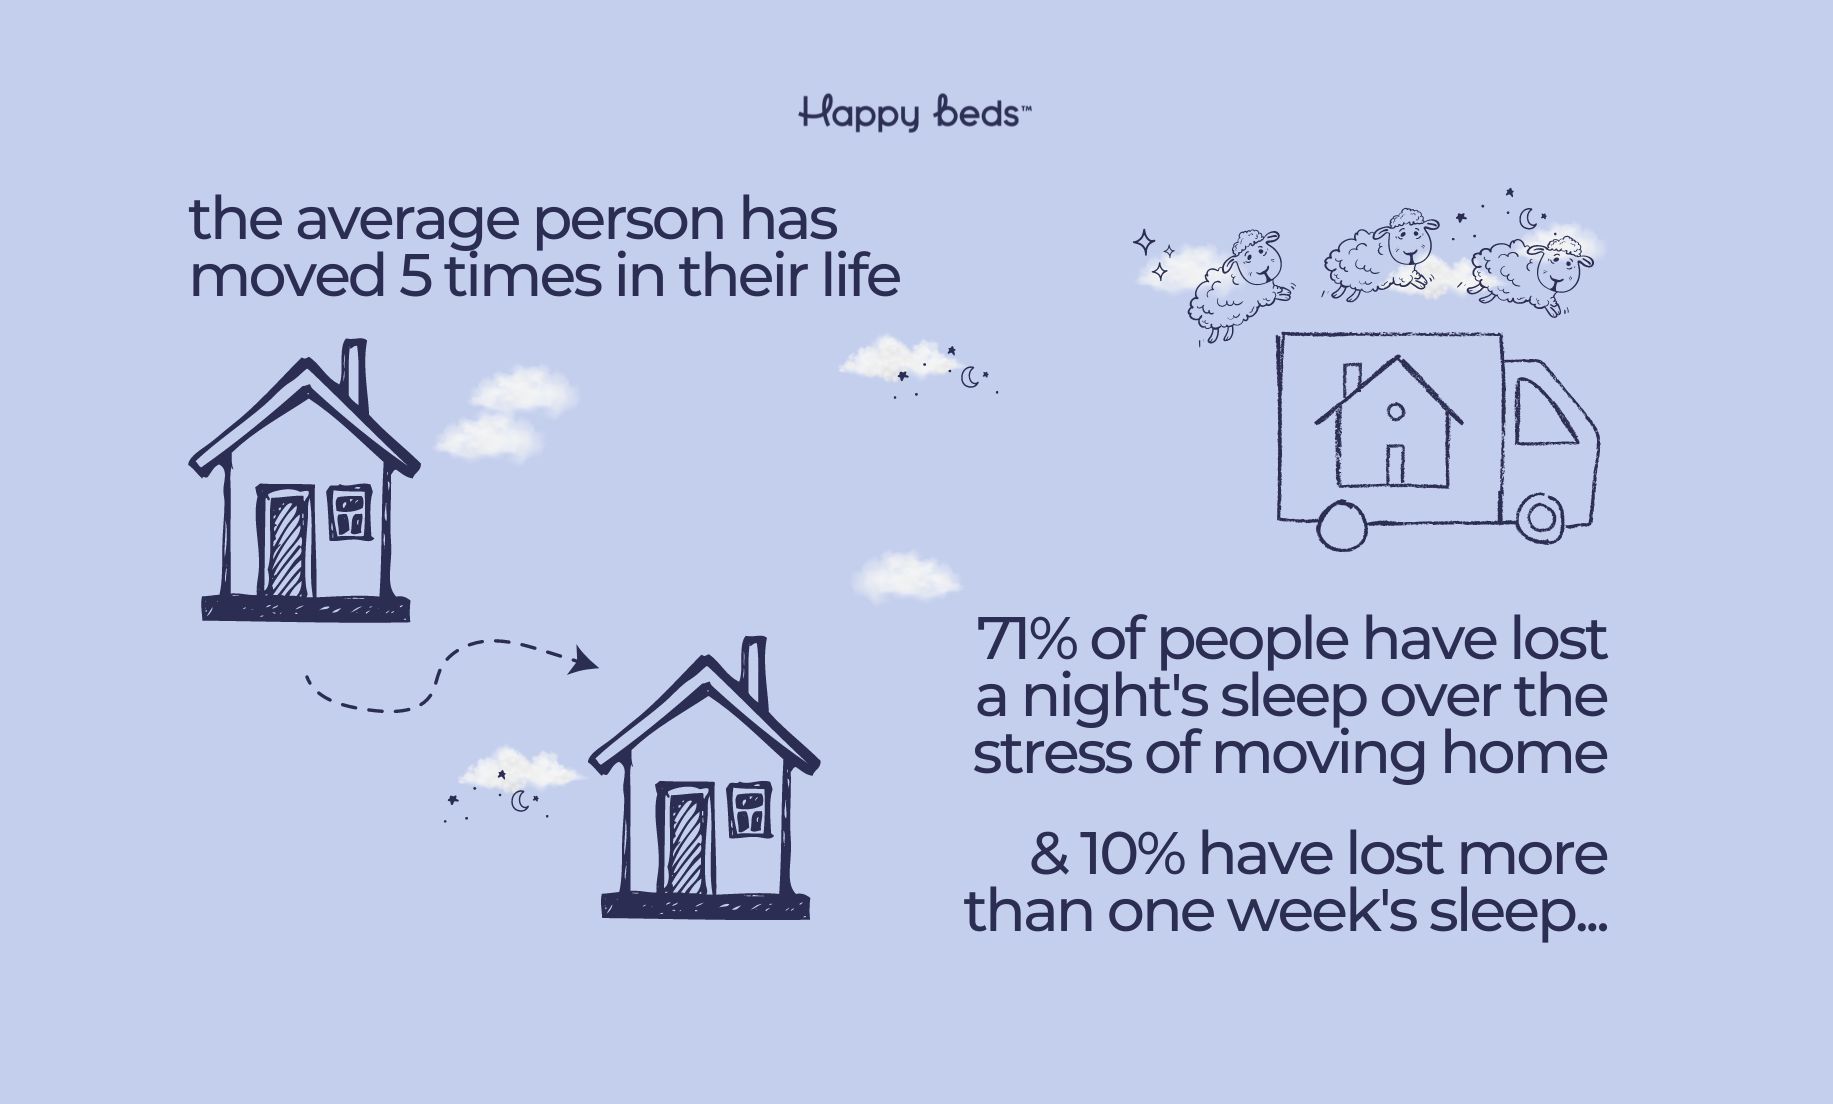 Many people lose sleep when moving house